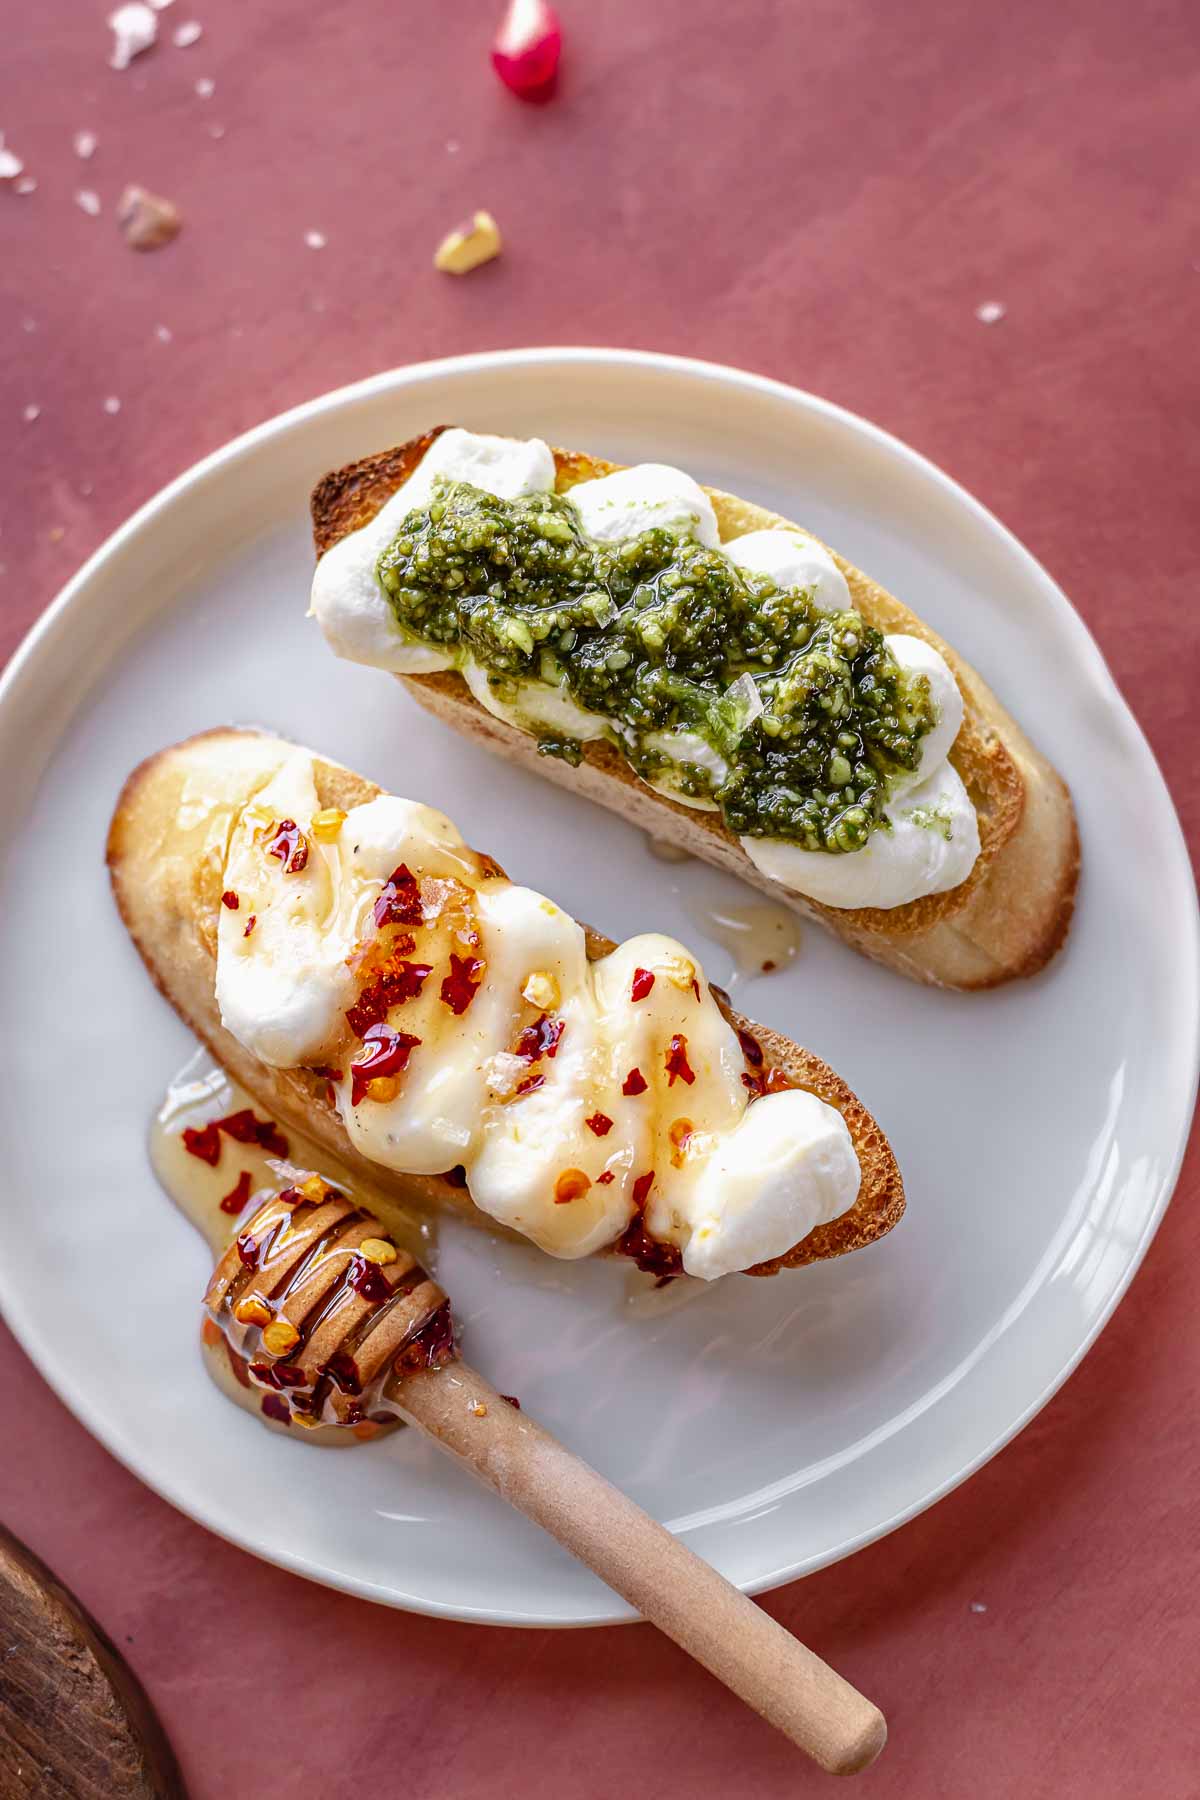 Two crostinis on a plate, one topped with hot honey and one topped with pesto.